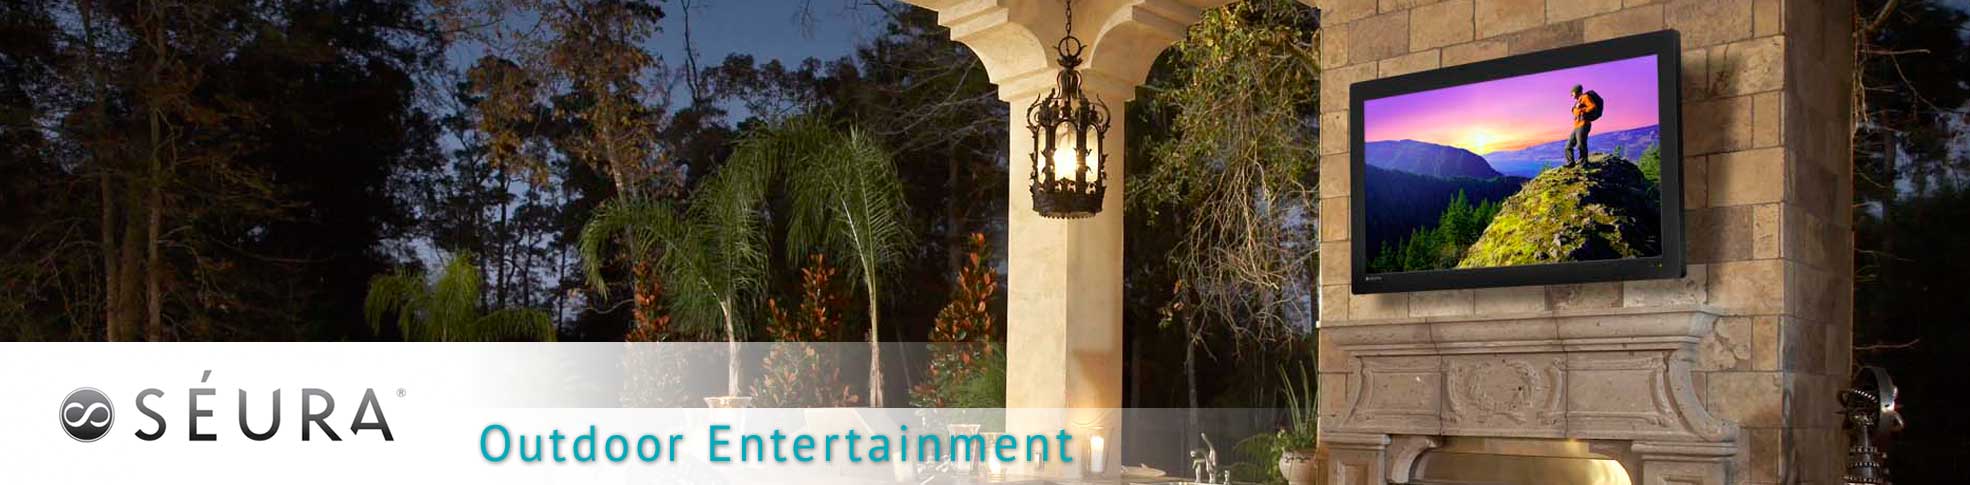 Seura makes weather resistant outdoor televisions for outdoor entertainment in Orlando, FL